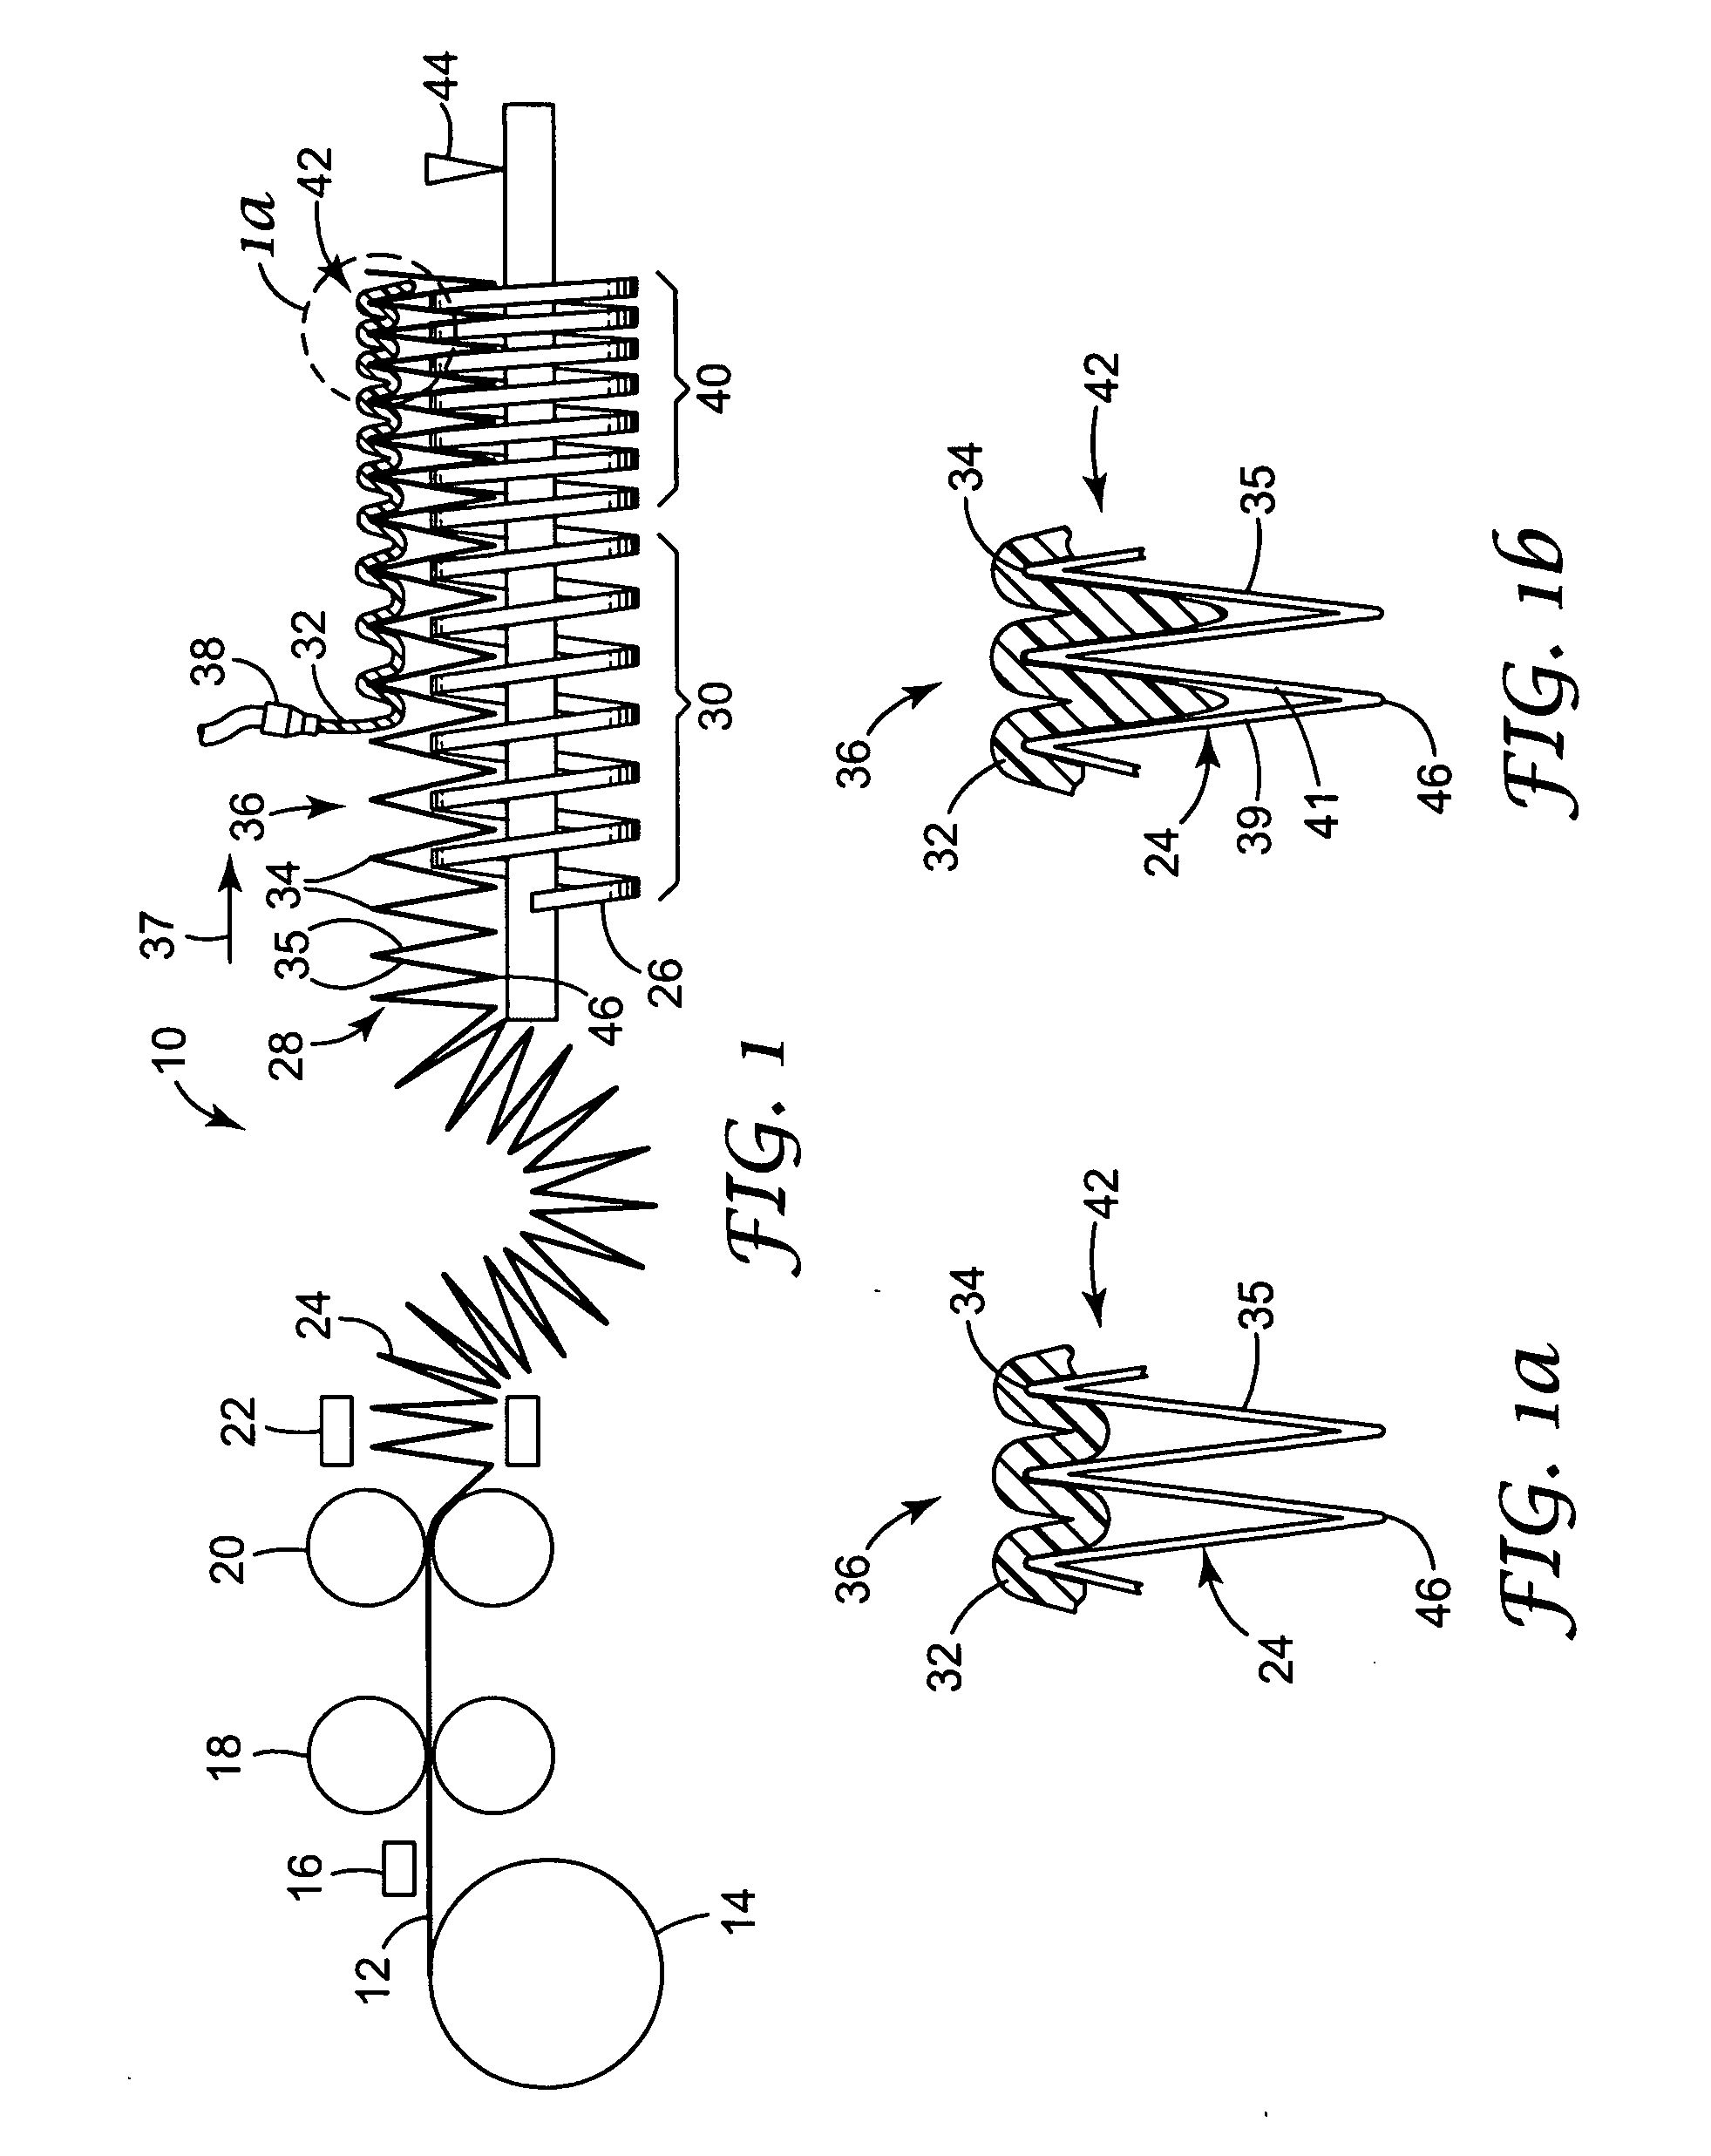 Self-supporting pleated filter media